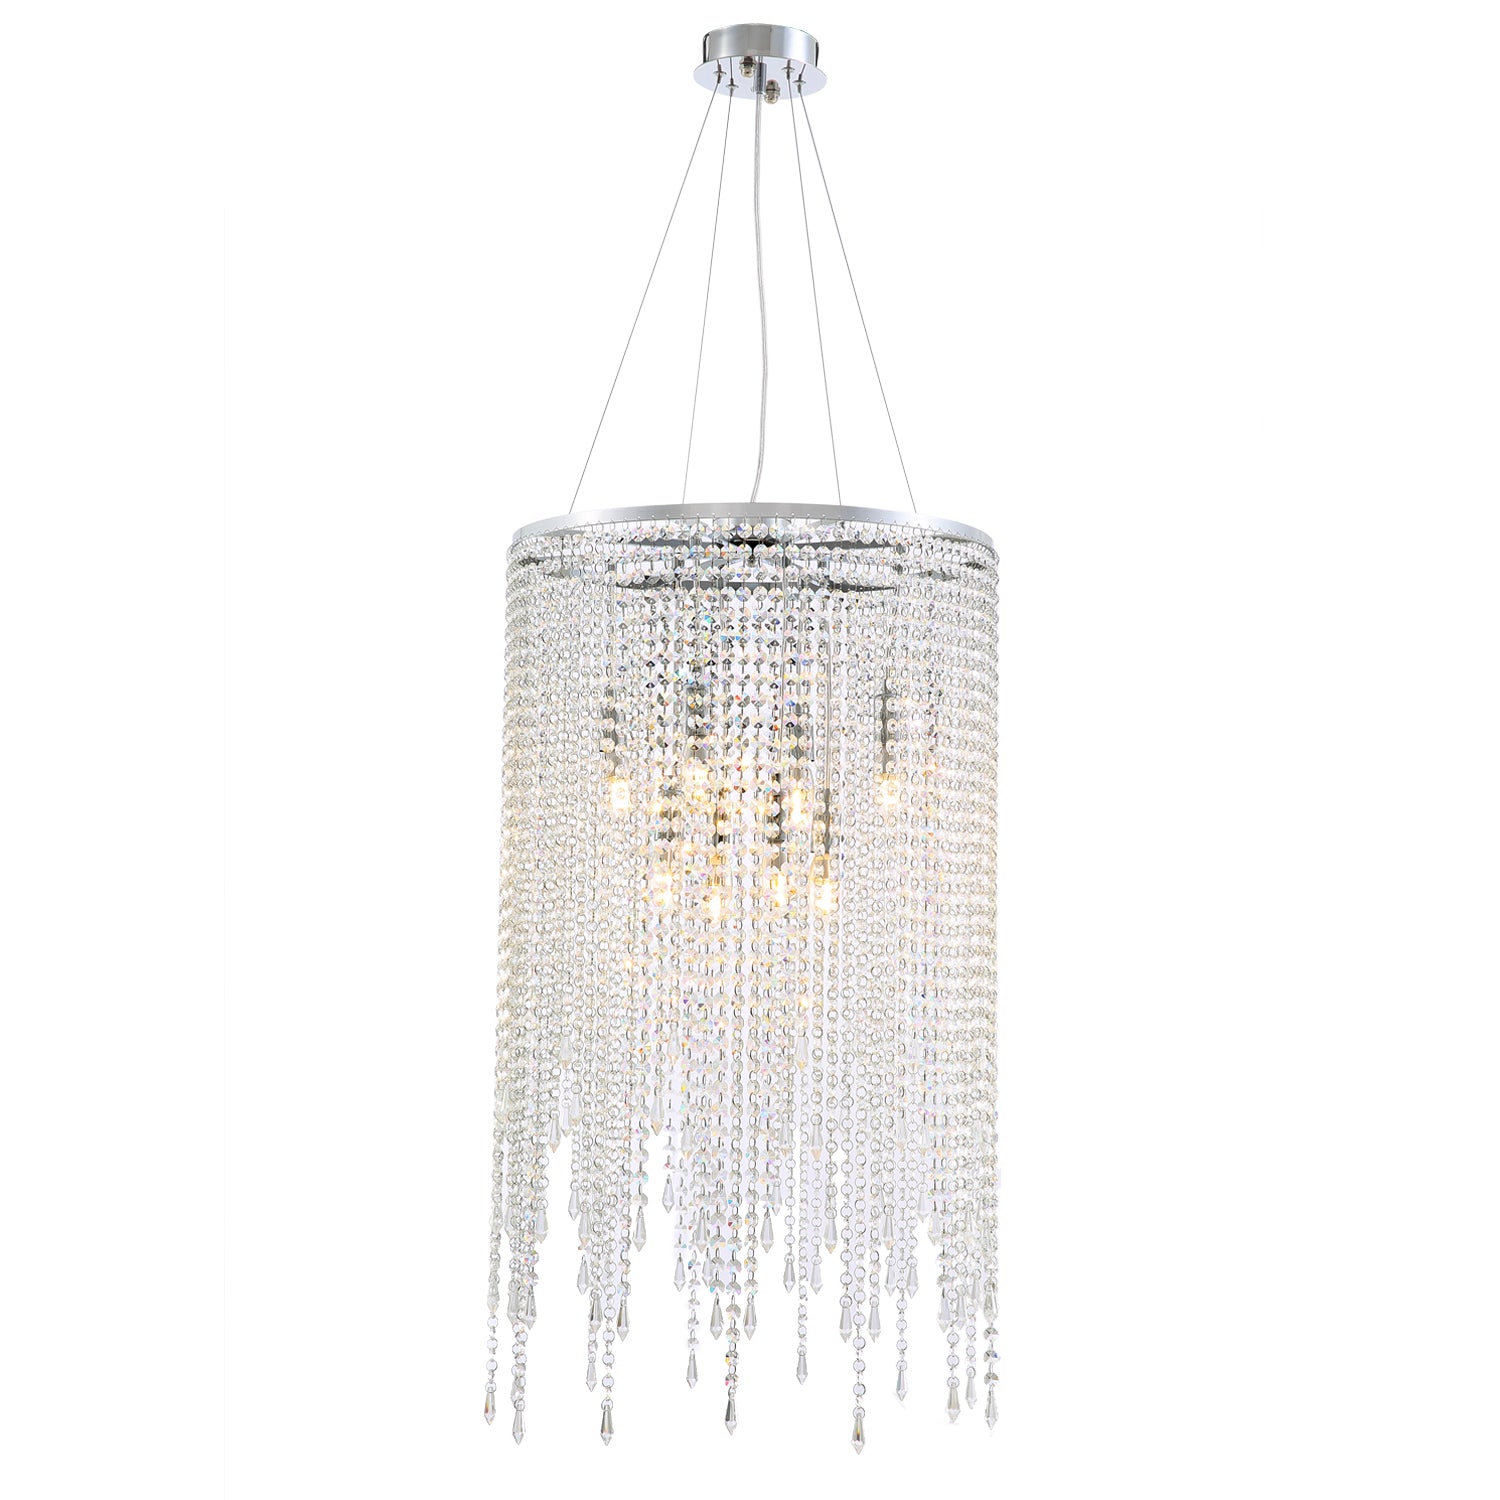 Luxury Linear Round Contemporary Island Crystal Chandelier With Warm Light